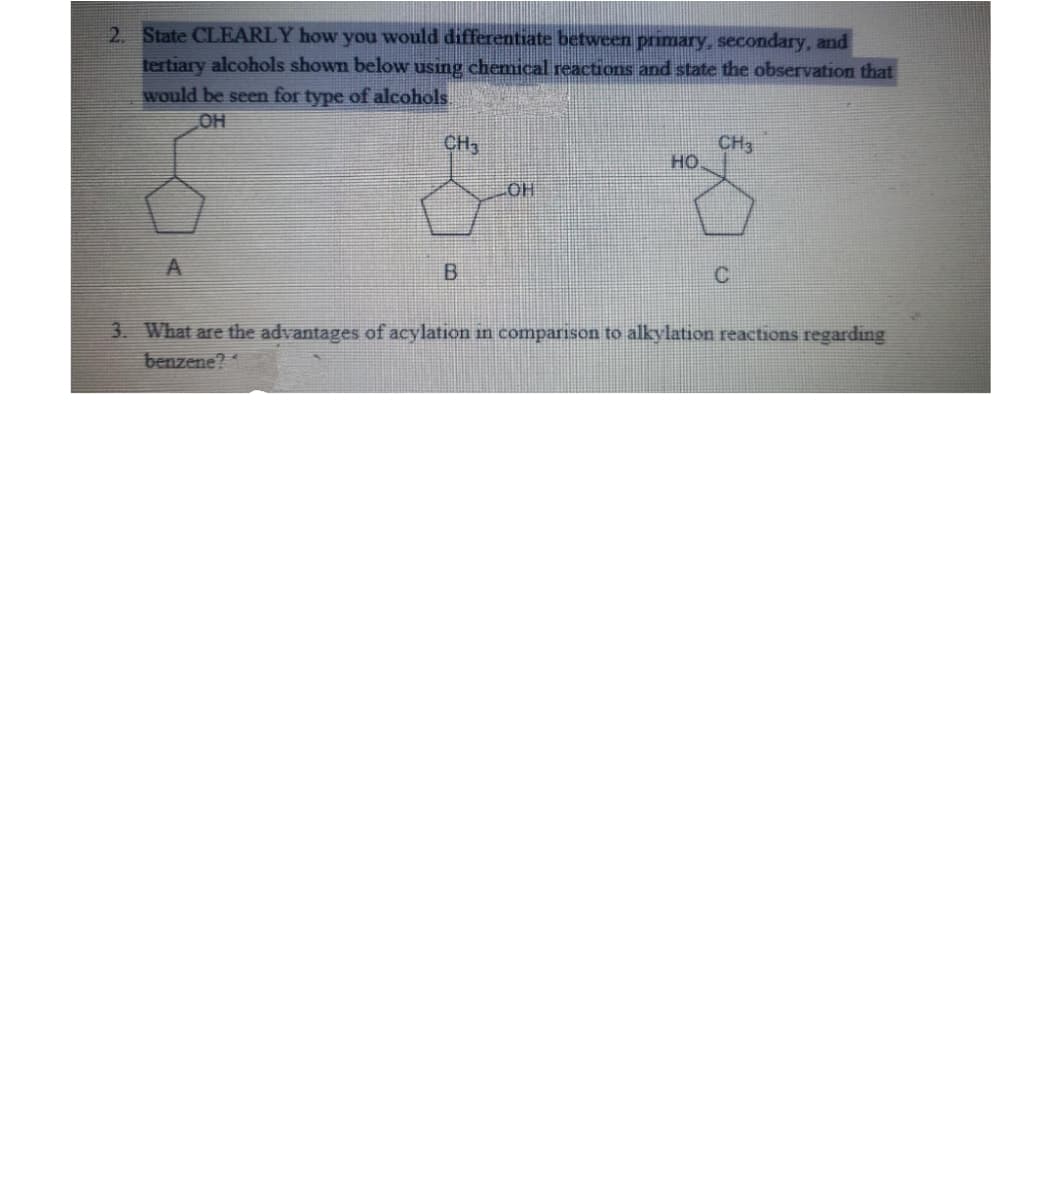 2. State CLEARLY how you would differentiate between primary, secondary, and
tertiary alcohols shown below using chemical reactions and state the observation that
would be seen for type of alcohols.
OH
A
CH3
CH3
HO
& S
LOH
B
C
3. What are the advantages of acylation in comparison to alkylation reactions regarding
benzene?